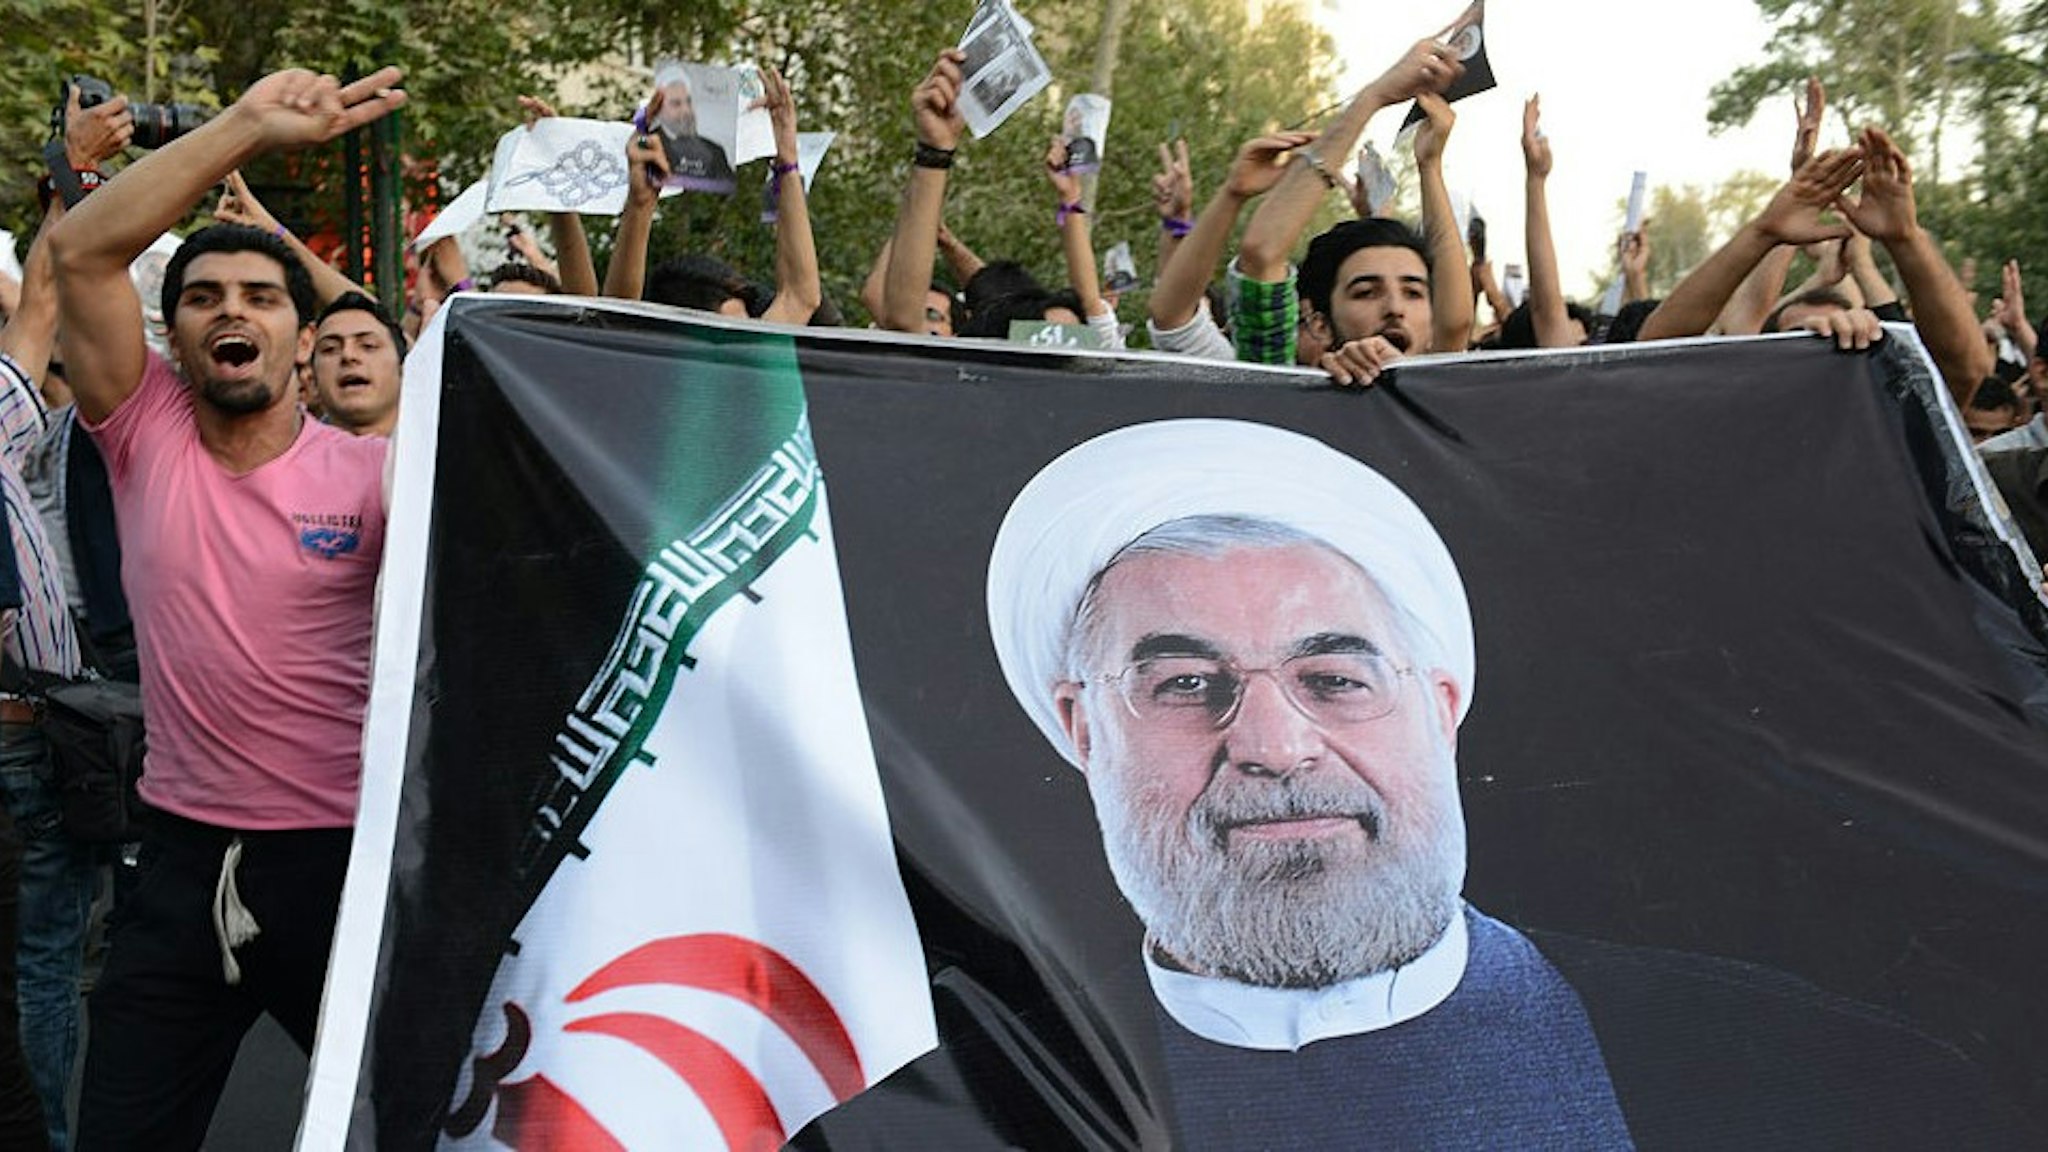 Youth supporters of Hasan Rouhani carry a huge banner with his photo imprinted on it three days prior to his presidential victory during a march on the street on June 12, 2013 in Tehran, Iran. On June 15th Rouhani's presidency was confirmed and announced by Iranian authorities. (Photo by